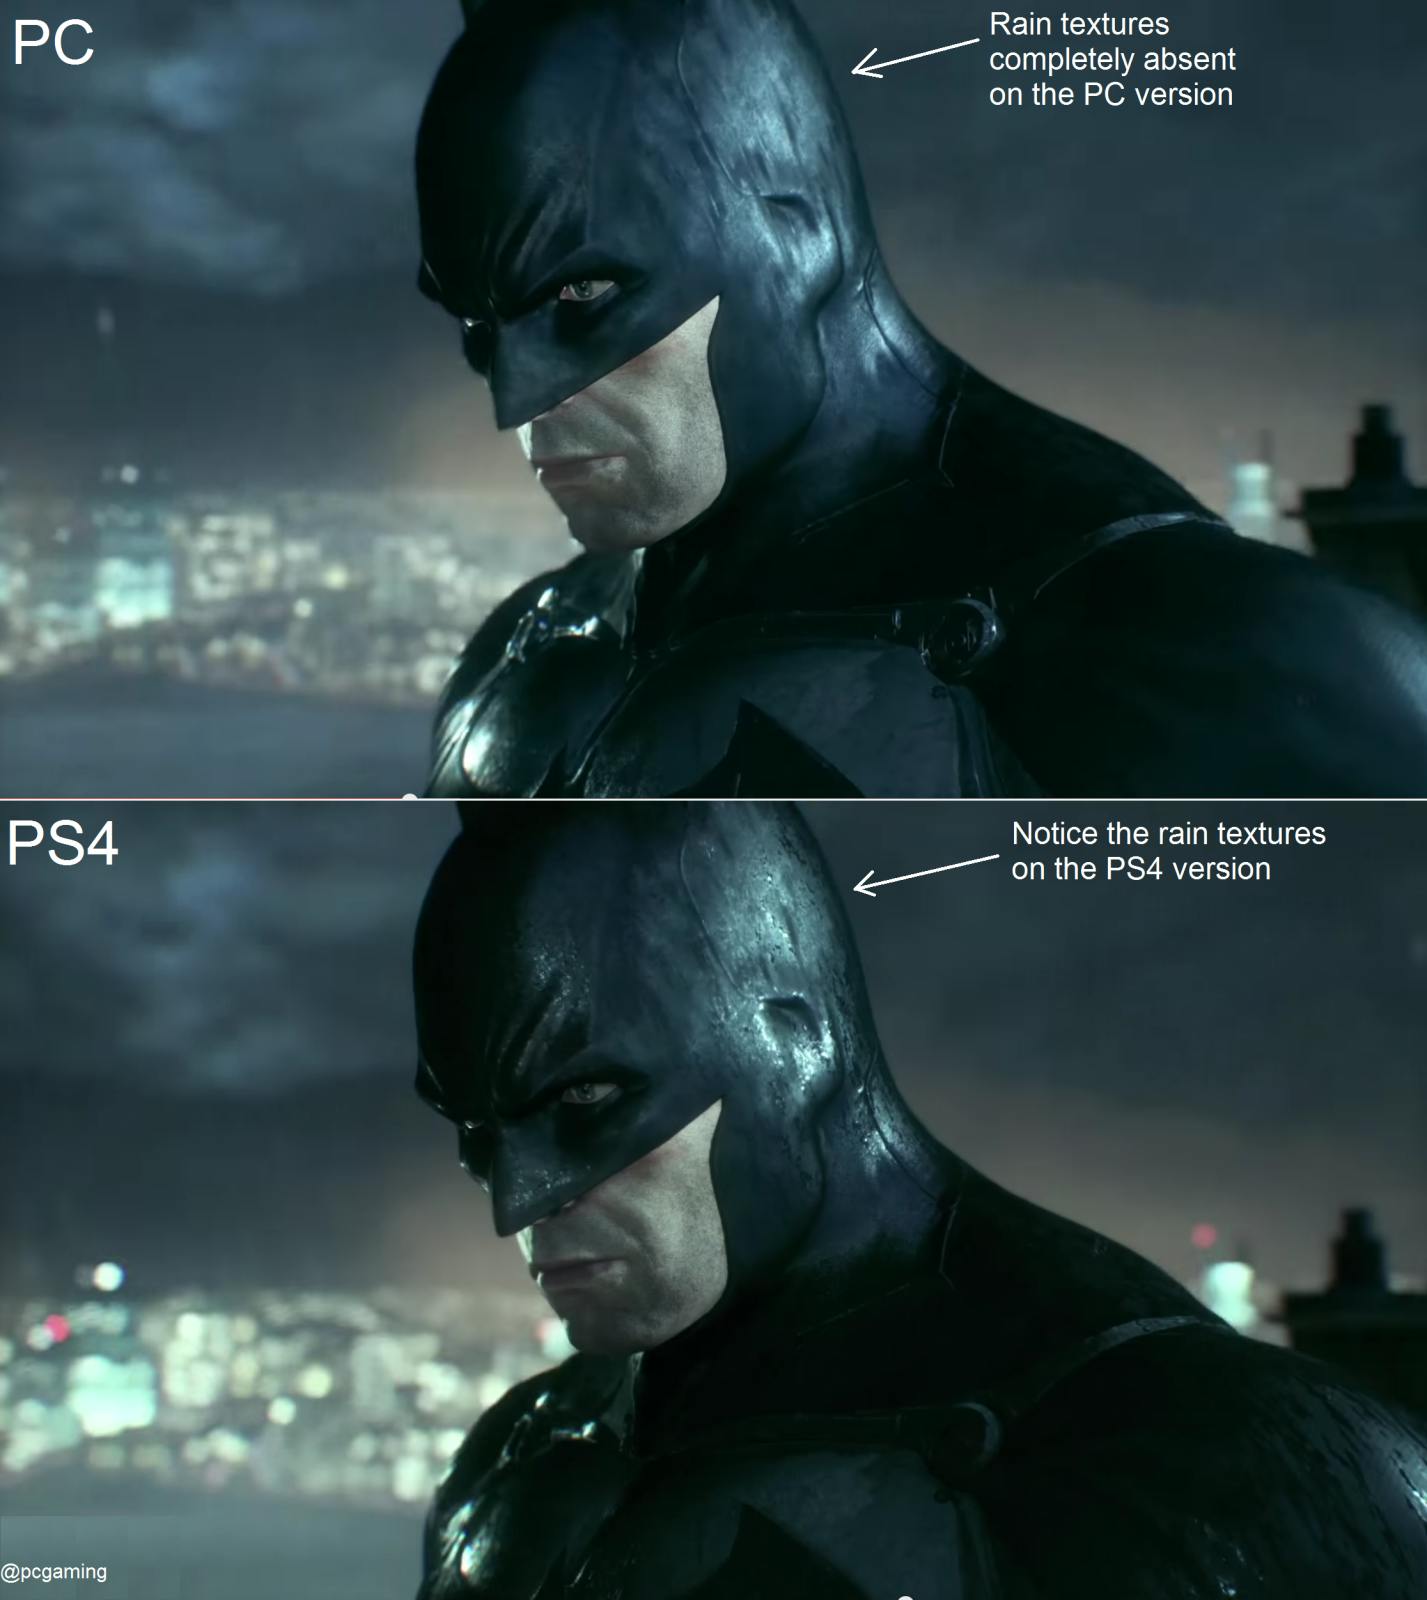 Controversy over Batman: Arkham Knight continues its PC disappointment -  The Daily Dot